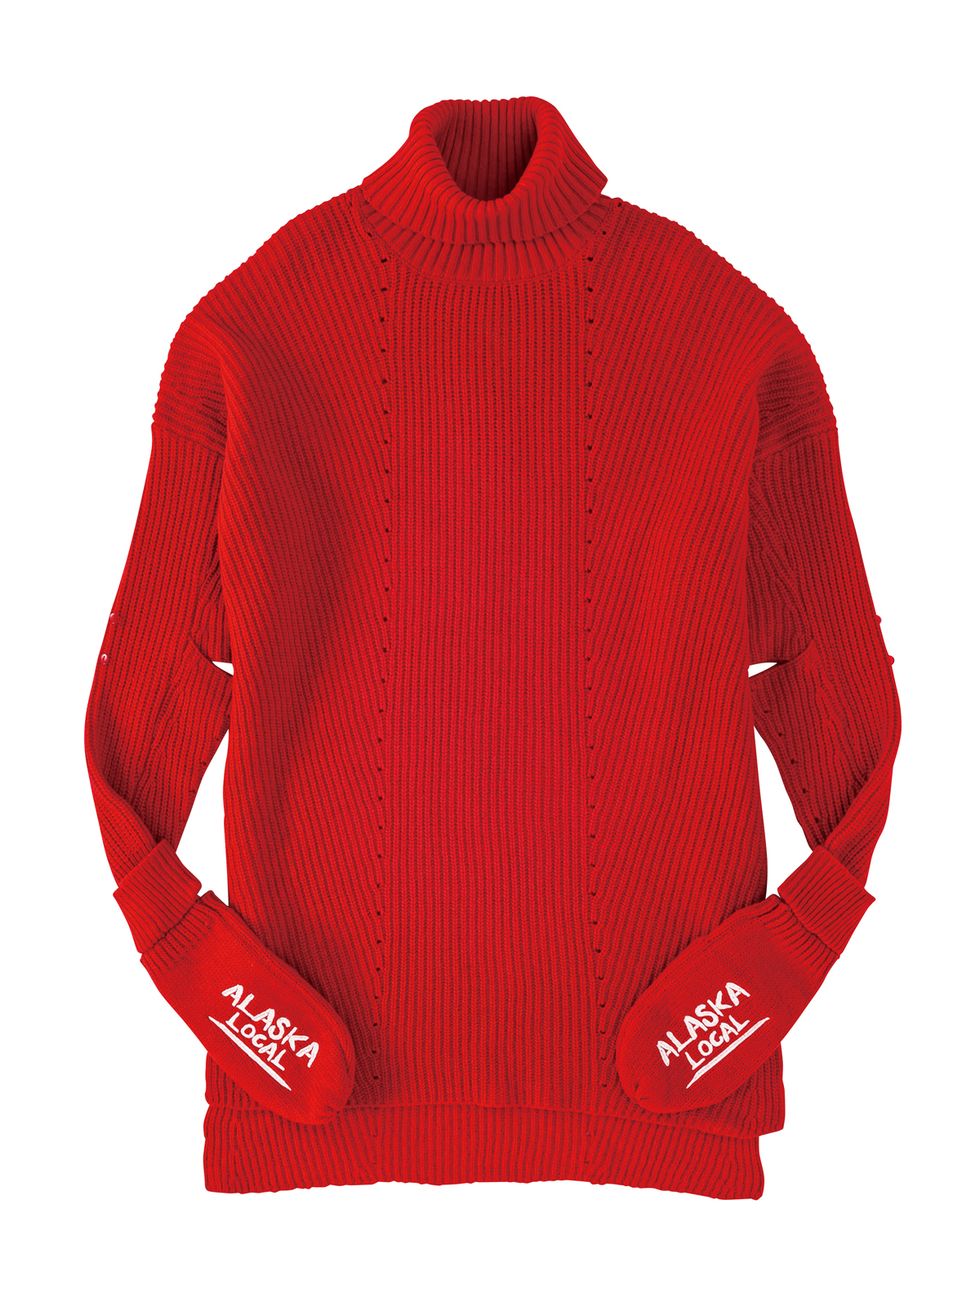 Clothing, Red, Sleeve, Outerwear, Sweater, Long-sleeved t-shirt, T-shirt, Neck, Jacket, Jersey, 